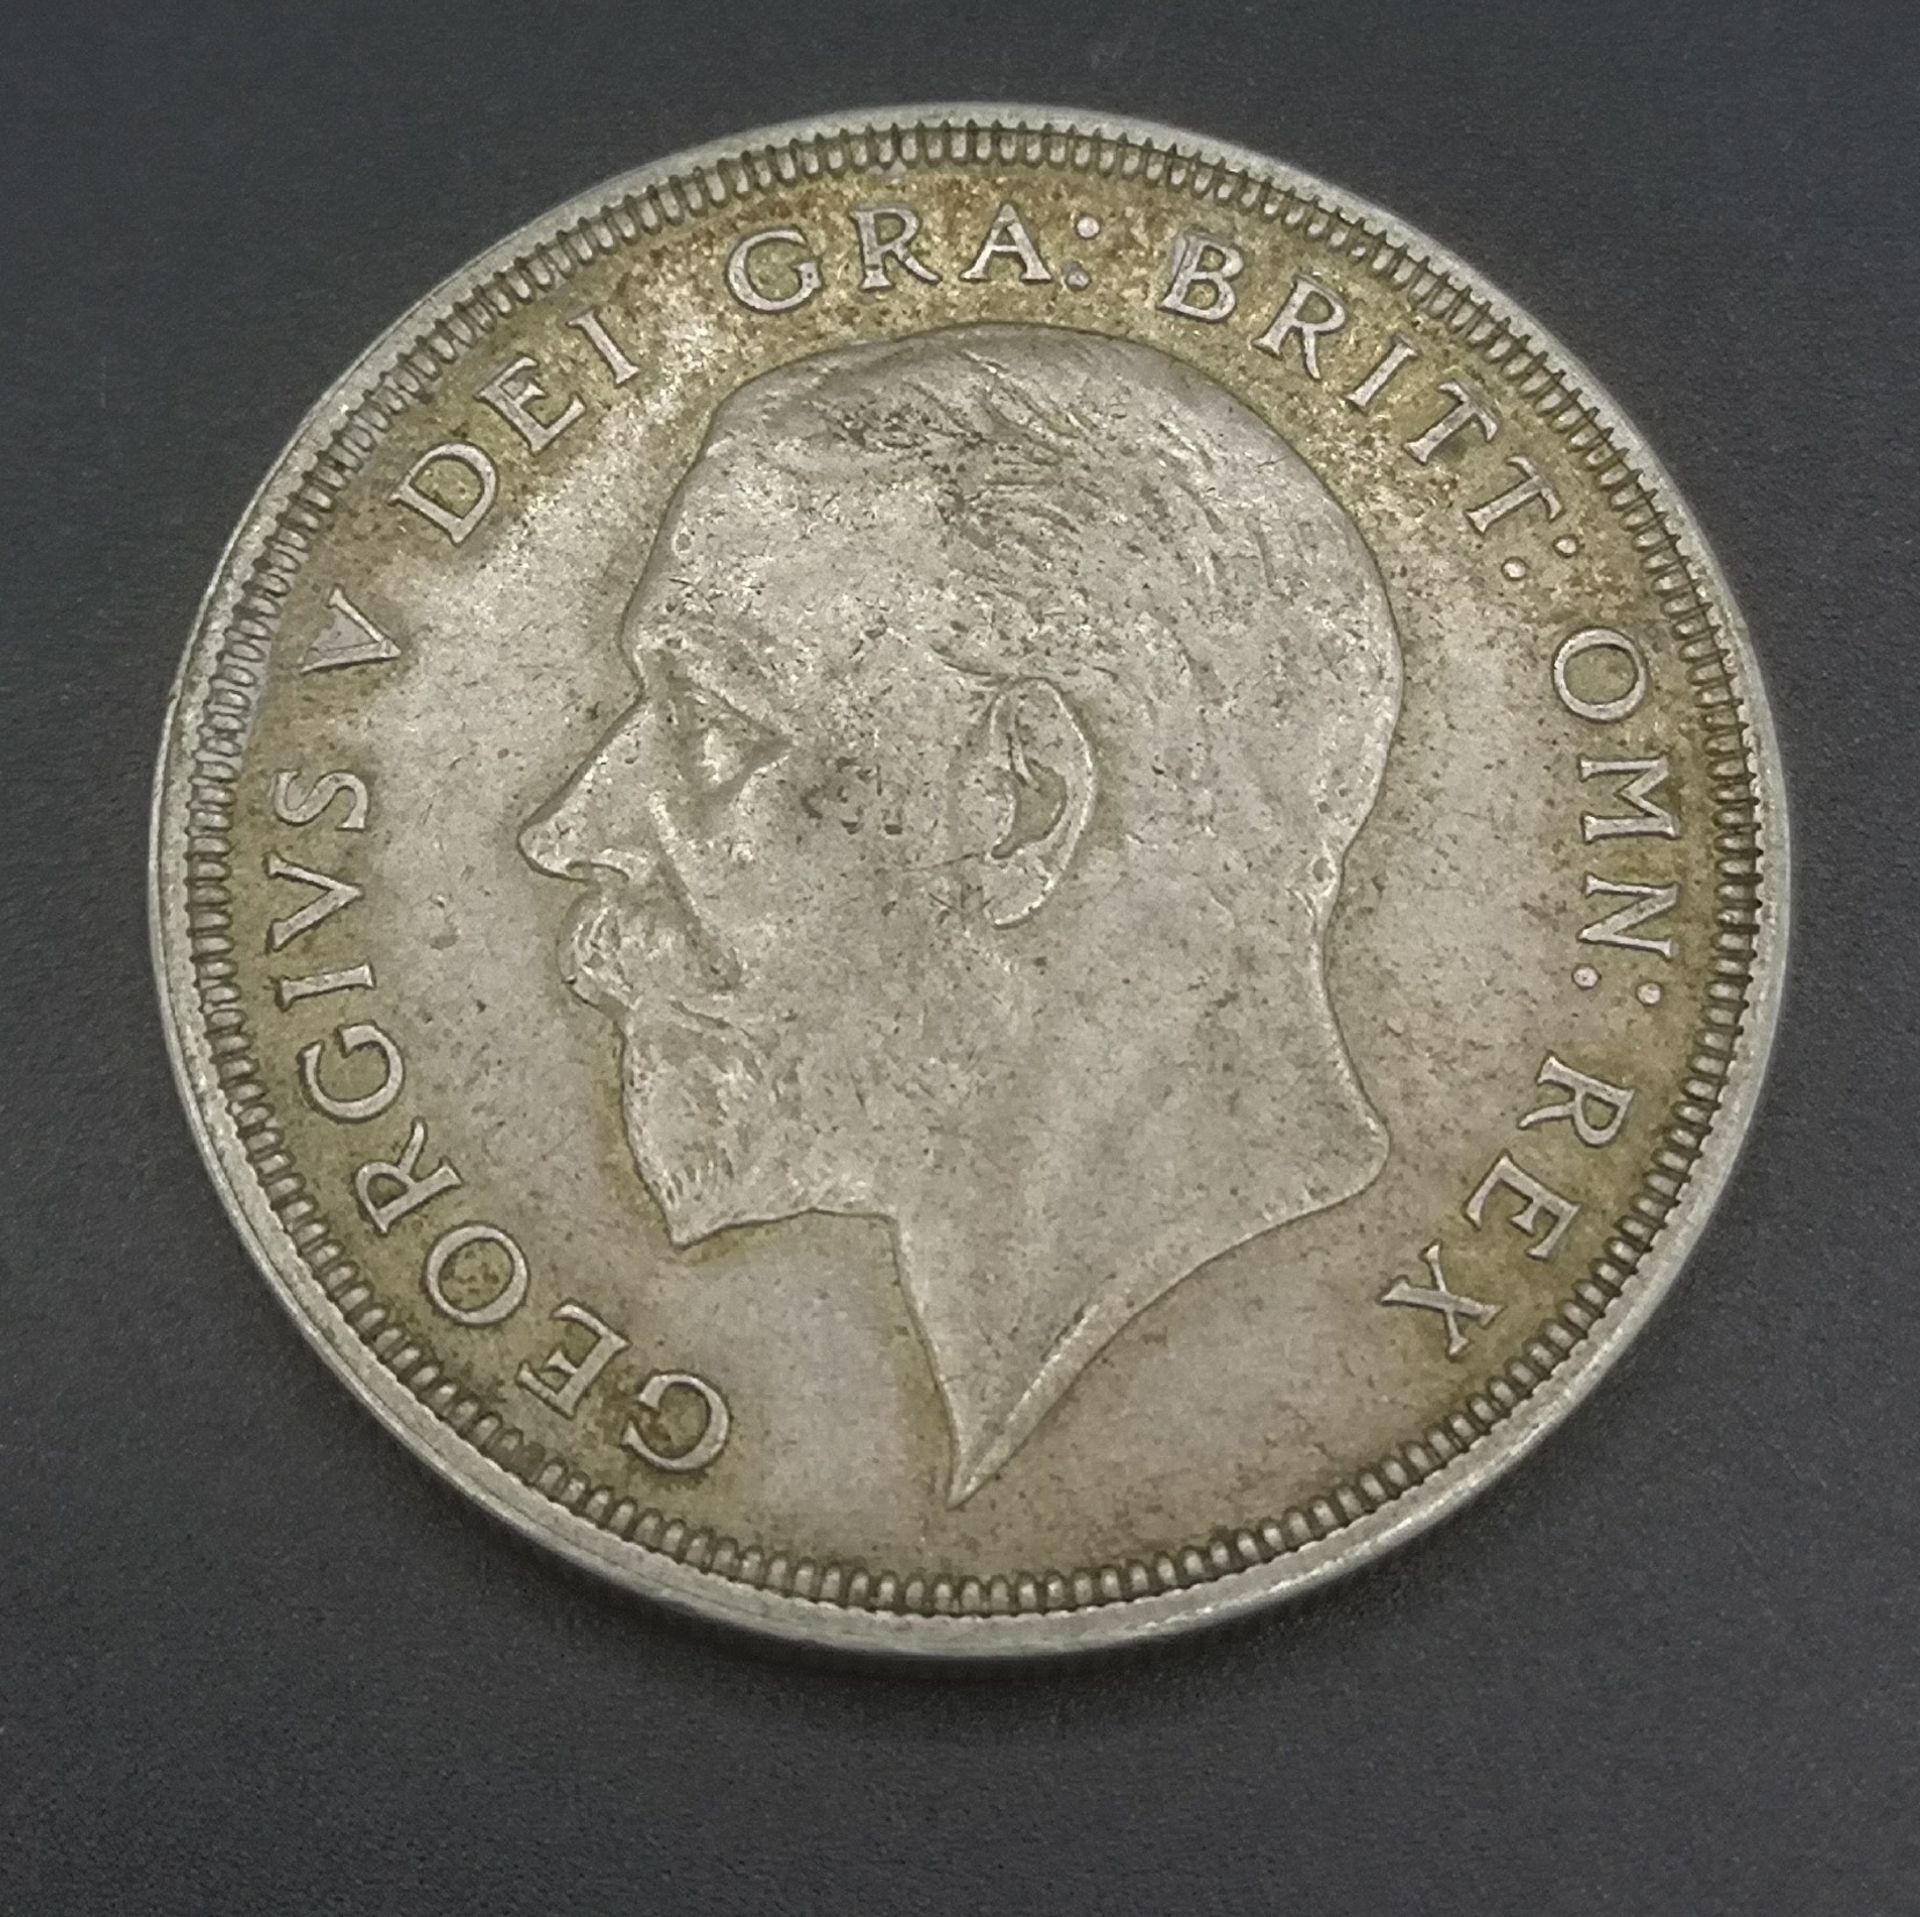 King George V 1933 wreath crown coin - Image 2 of 4